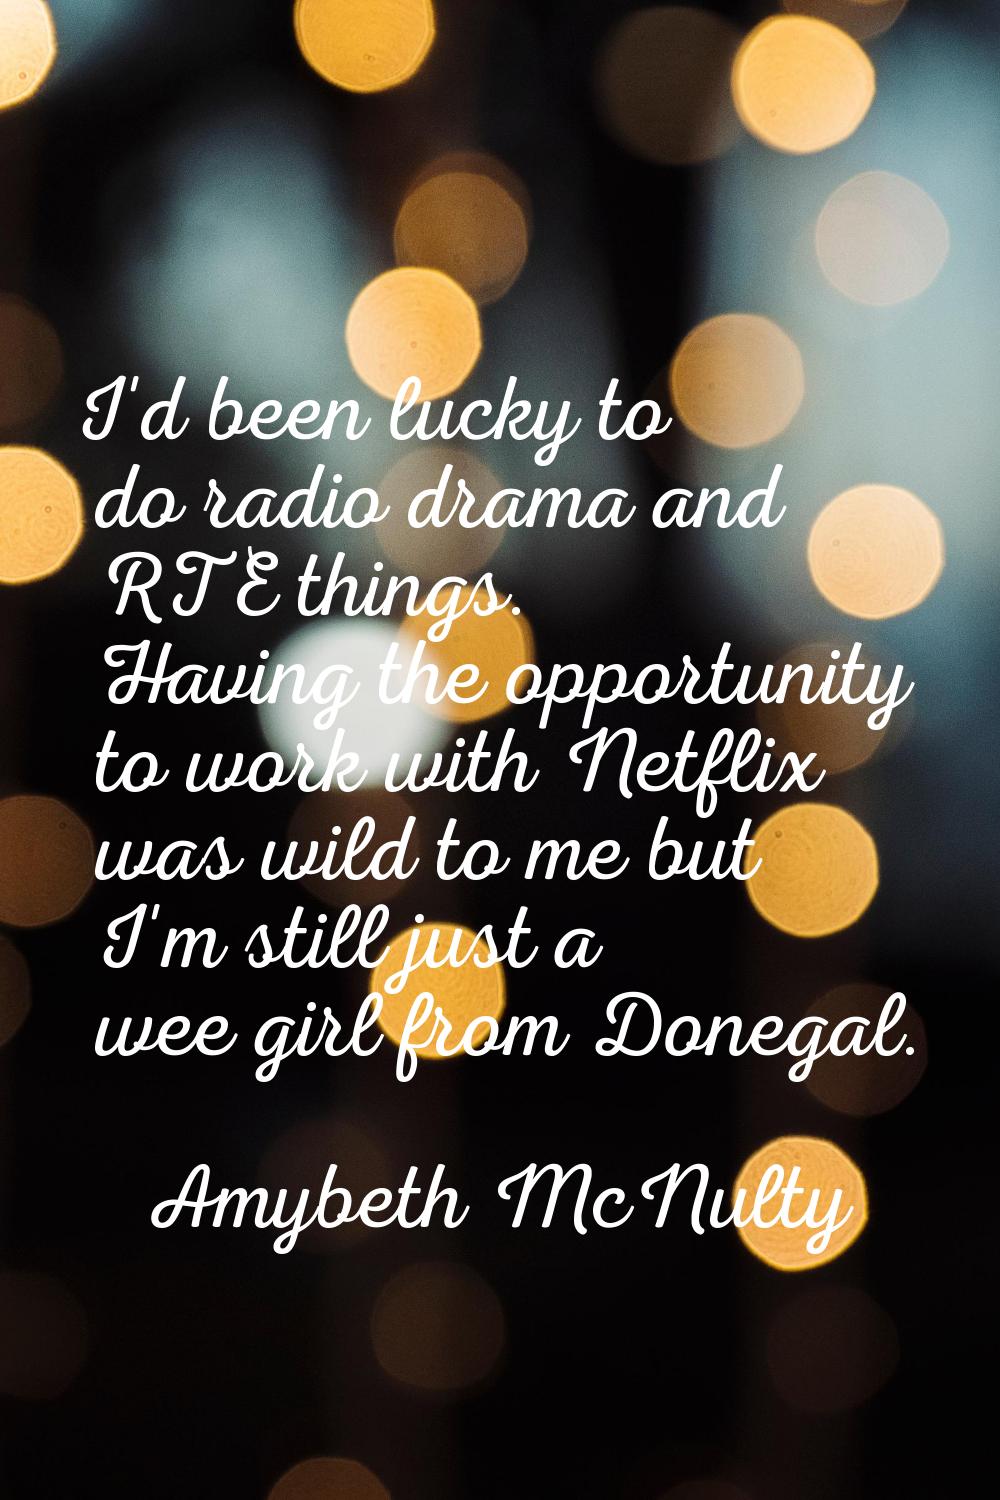 I'd been lucky to do radio drama and RTE things. Having the opportunity to work with Netflix was wi